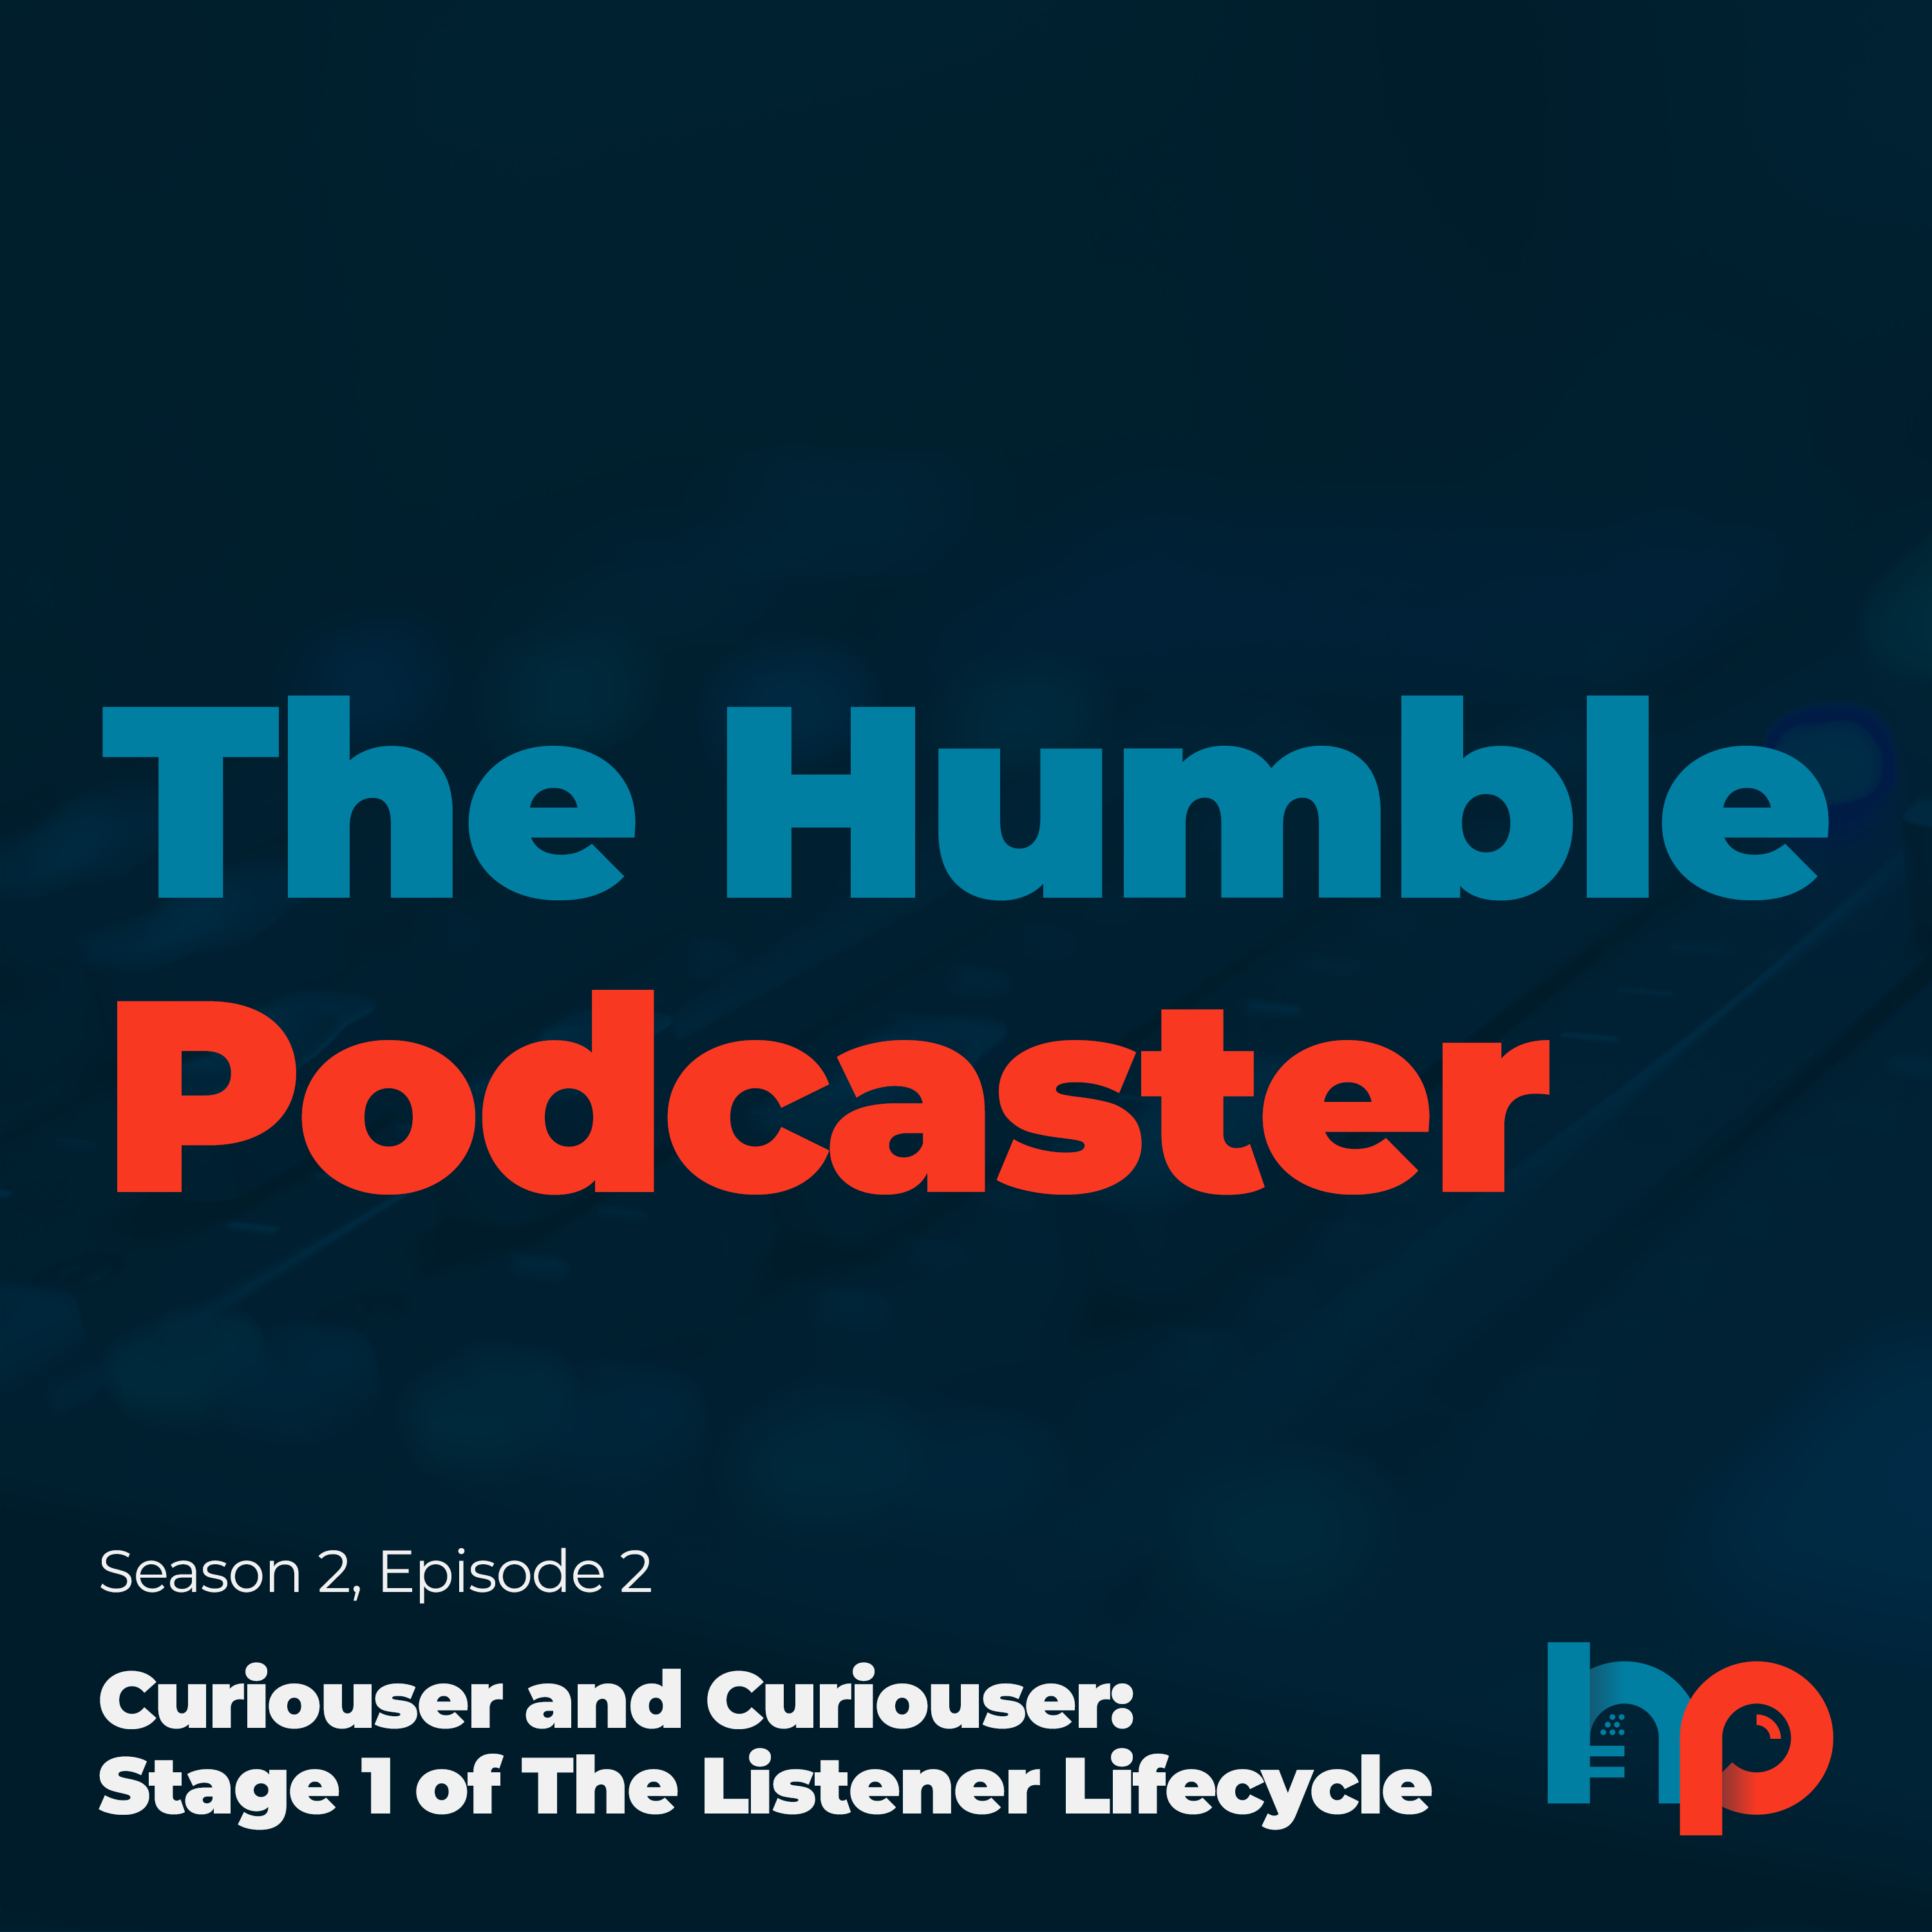 Curiouser and Curiouser: Stage 1 of The Listener Lifecycle